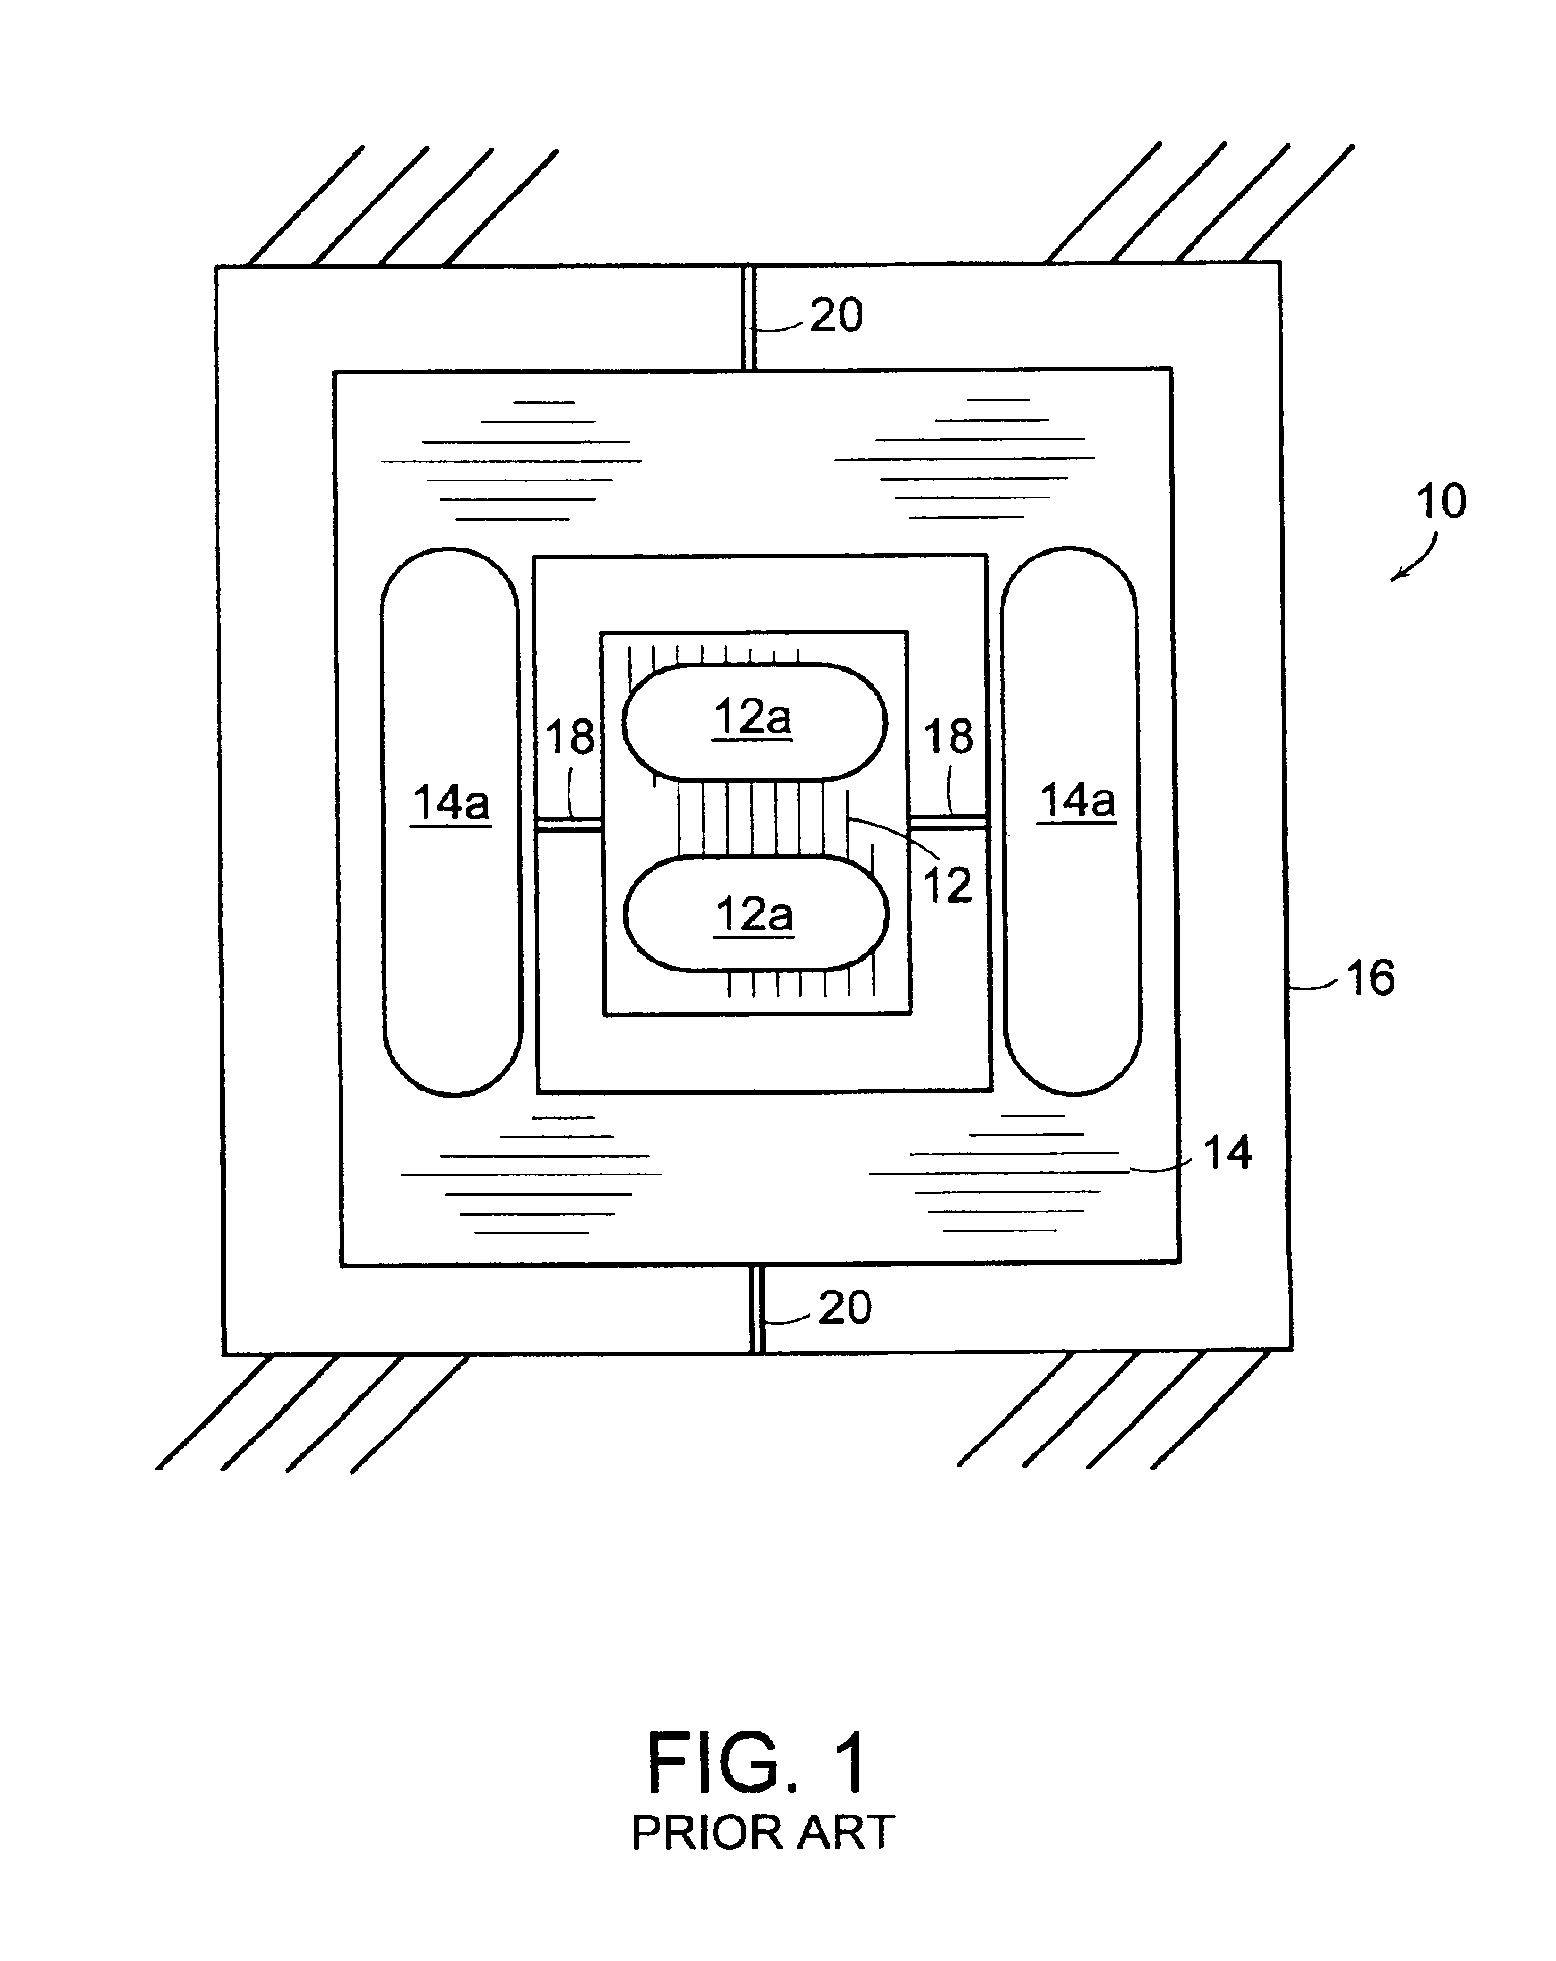 Pointing angle control of electrostatic micro mirrors